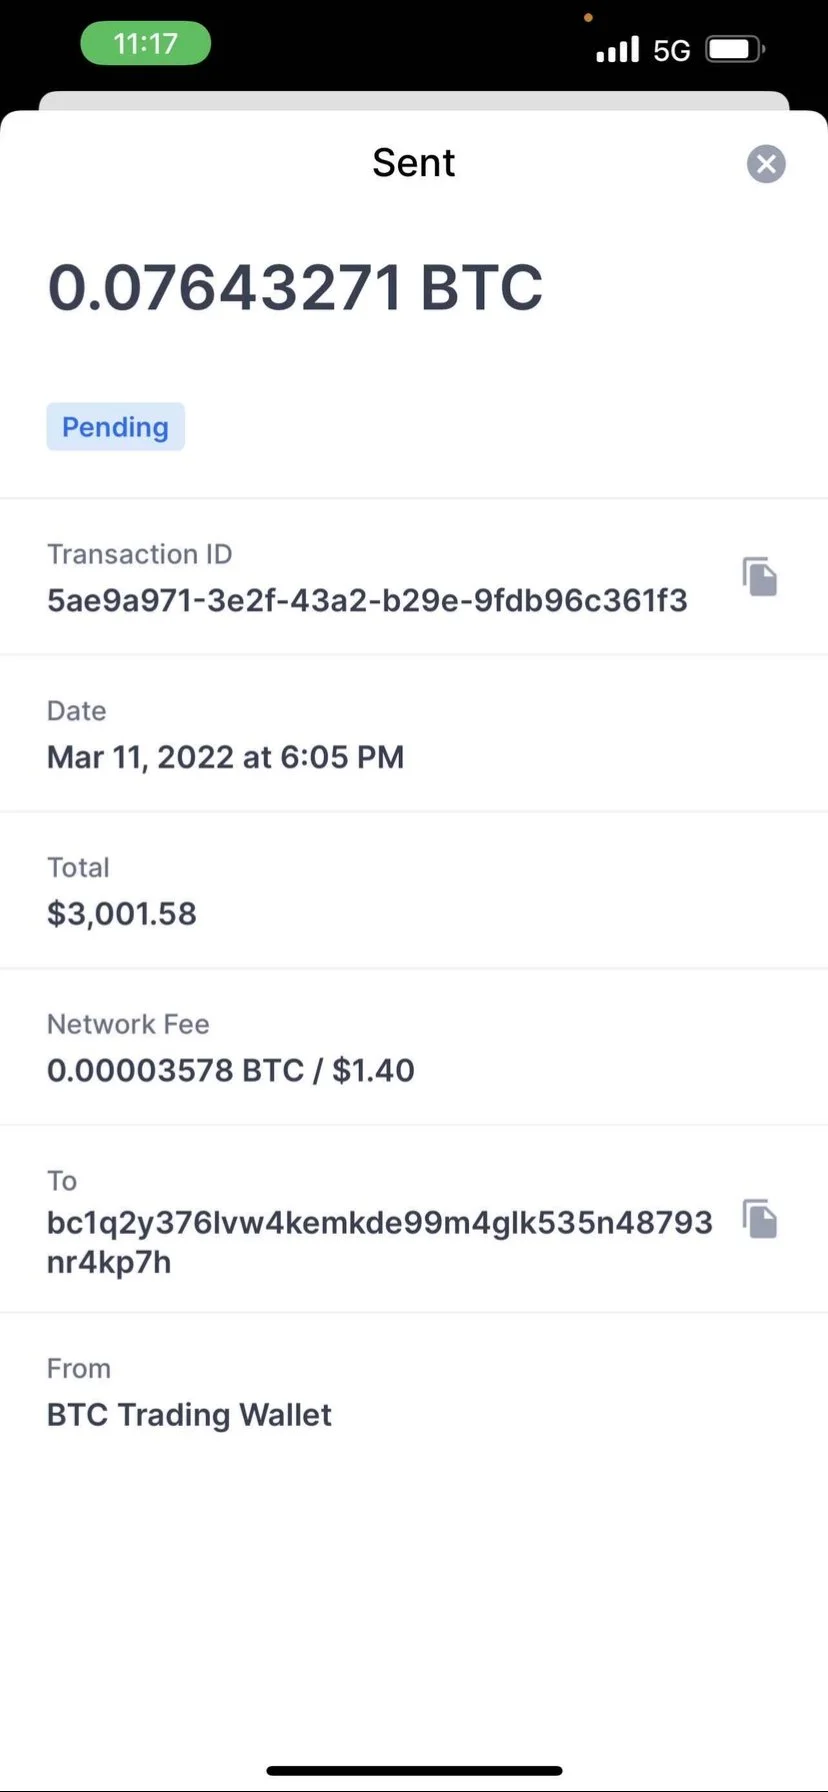 The $3000 Bitcoin sent to the Scam Company 